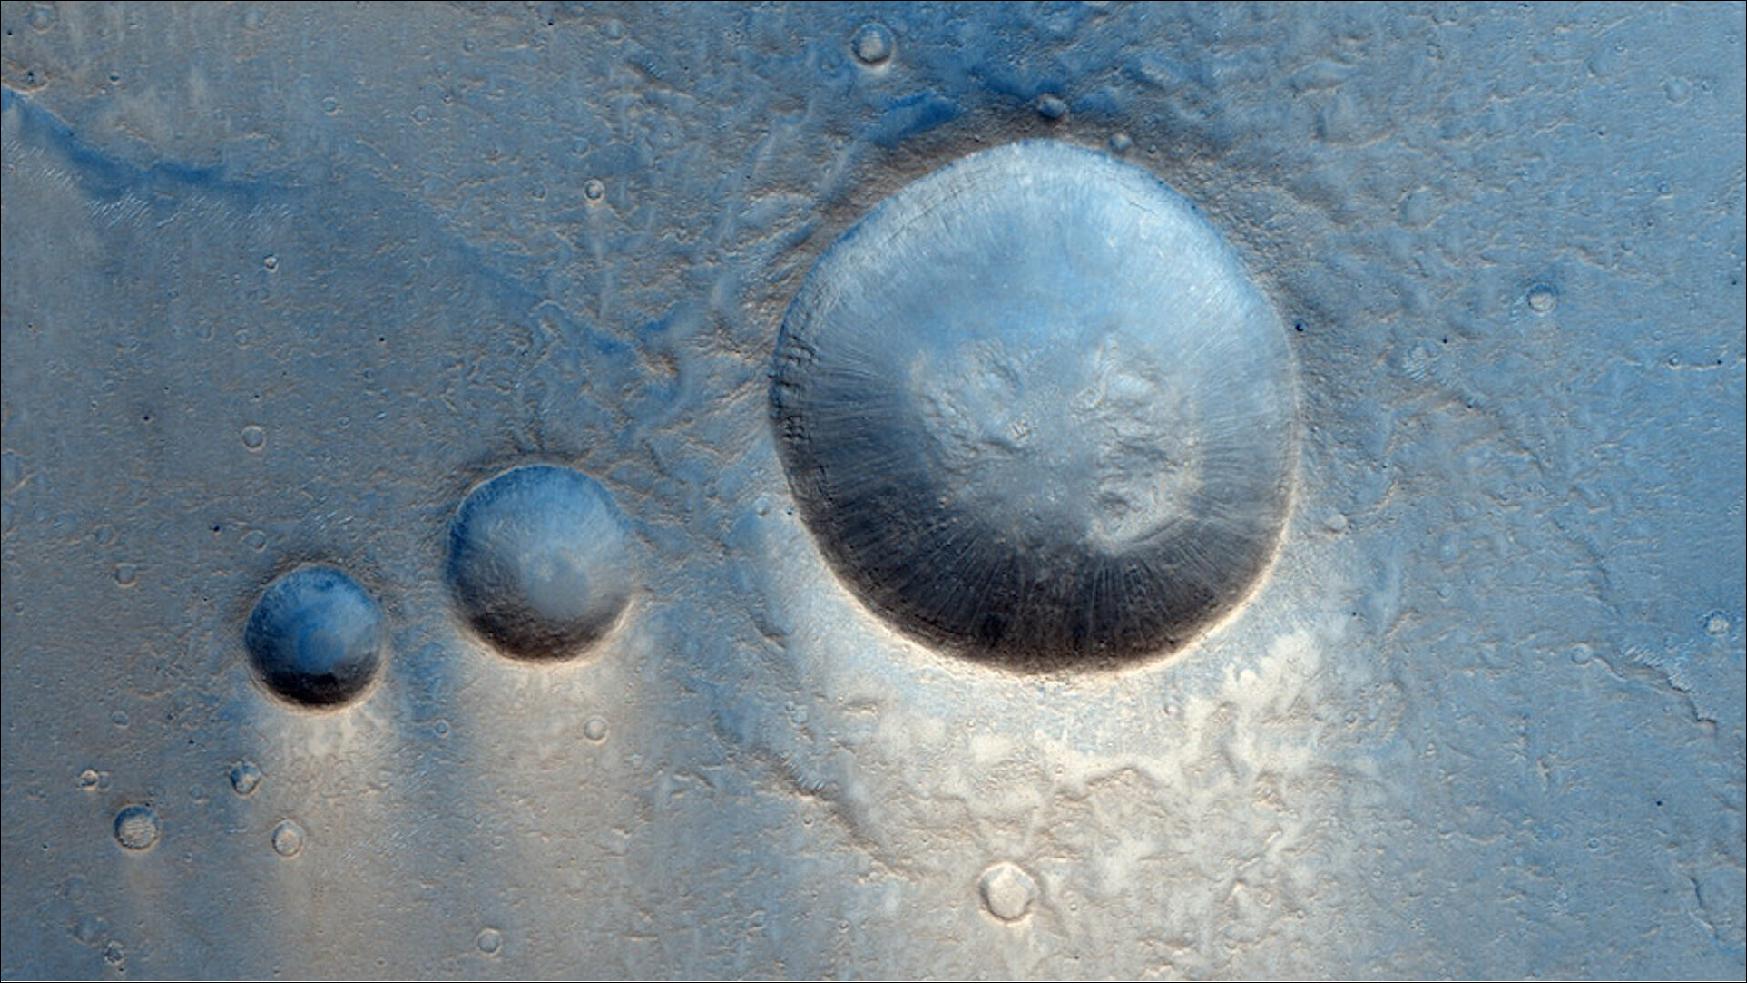 Figure 22: This Mars region is known to be covered by large lava deposits probably from the nearby Tharsis Montes volcanoes. In this image three medium-sized impact craters take center stage, with many smaller impacts pockmarking the scene. Zooming into the larger craters it is possible to see layers in the inner rim that could represent the successive accumulation of lava flows in this area (image credit: ESA/Roscosmos/CaSSIS, CC BY-SA 3.0 IGO)